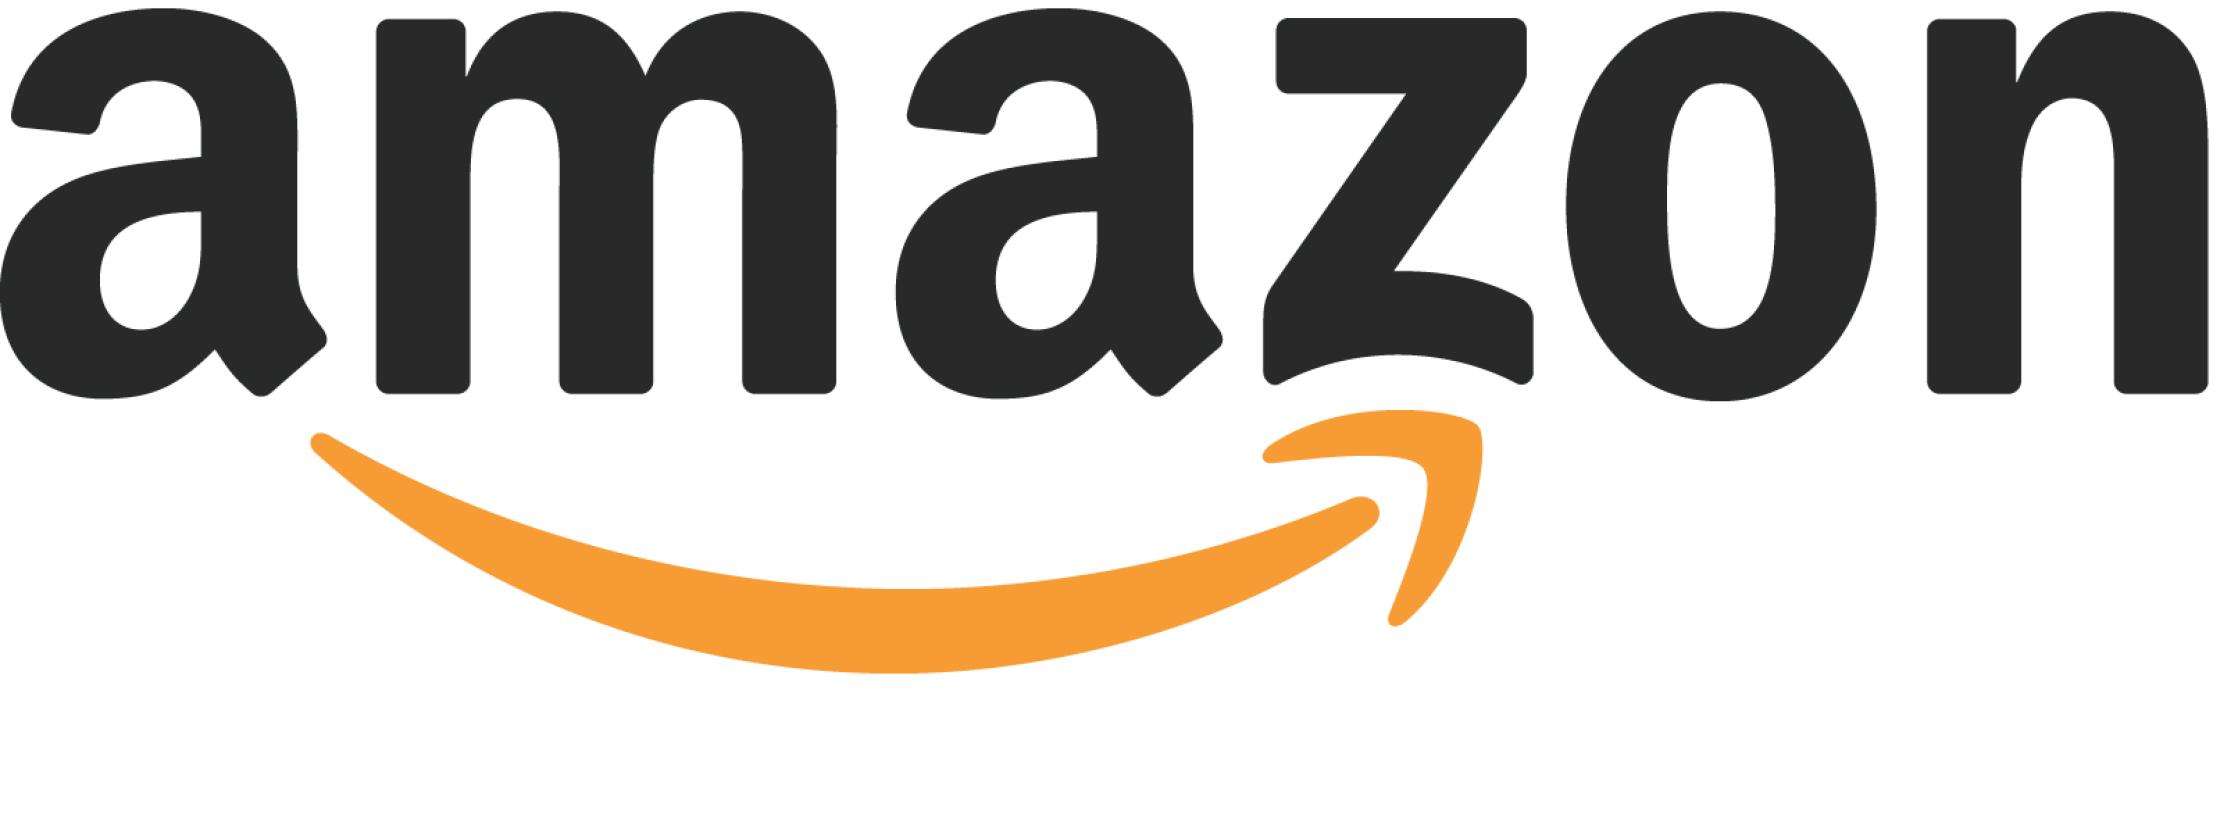 Amazon — The arrow in the Amazon logo points from A to Z, referring to